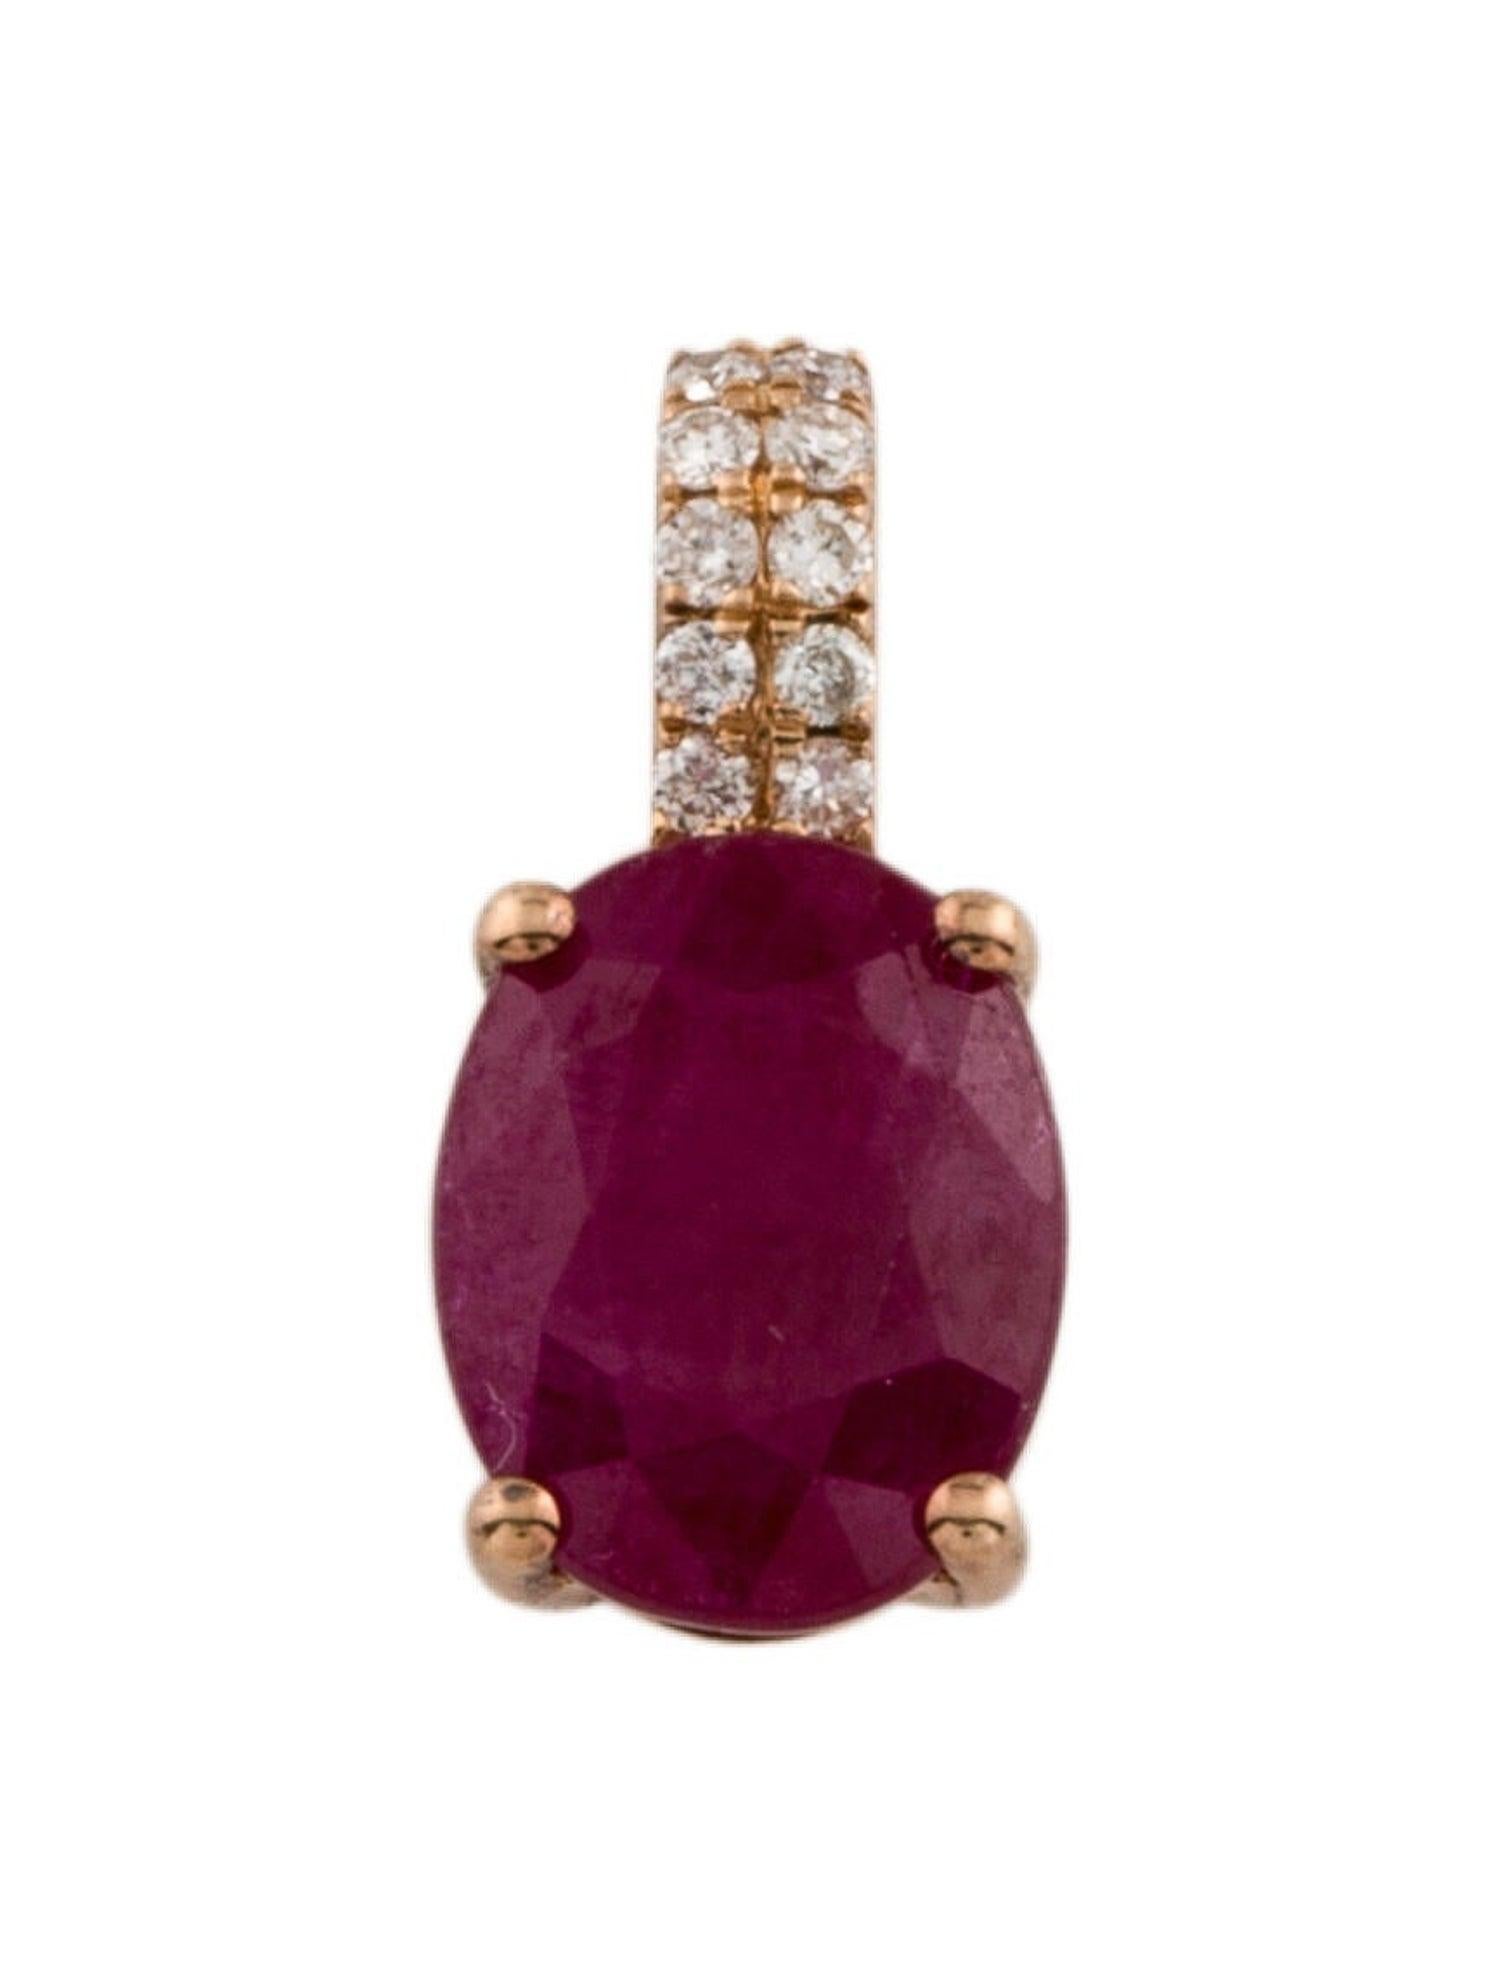 18K 1.82ct Ruby & Diamond Pendant - Elegant & Timeless Gemstone Statement Piece In New Condition For Sale In Holtsville, NY